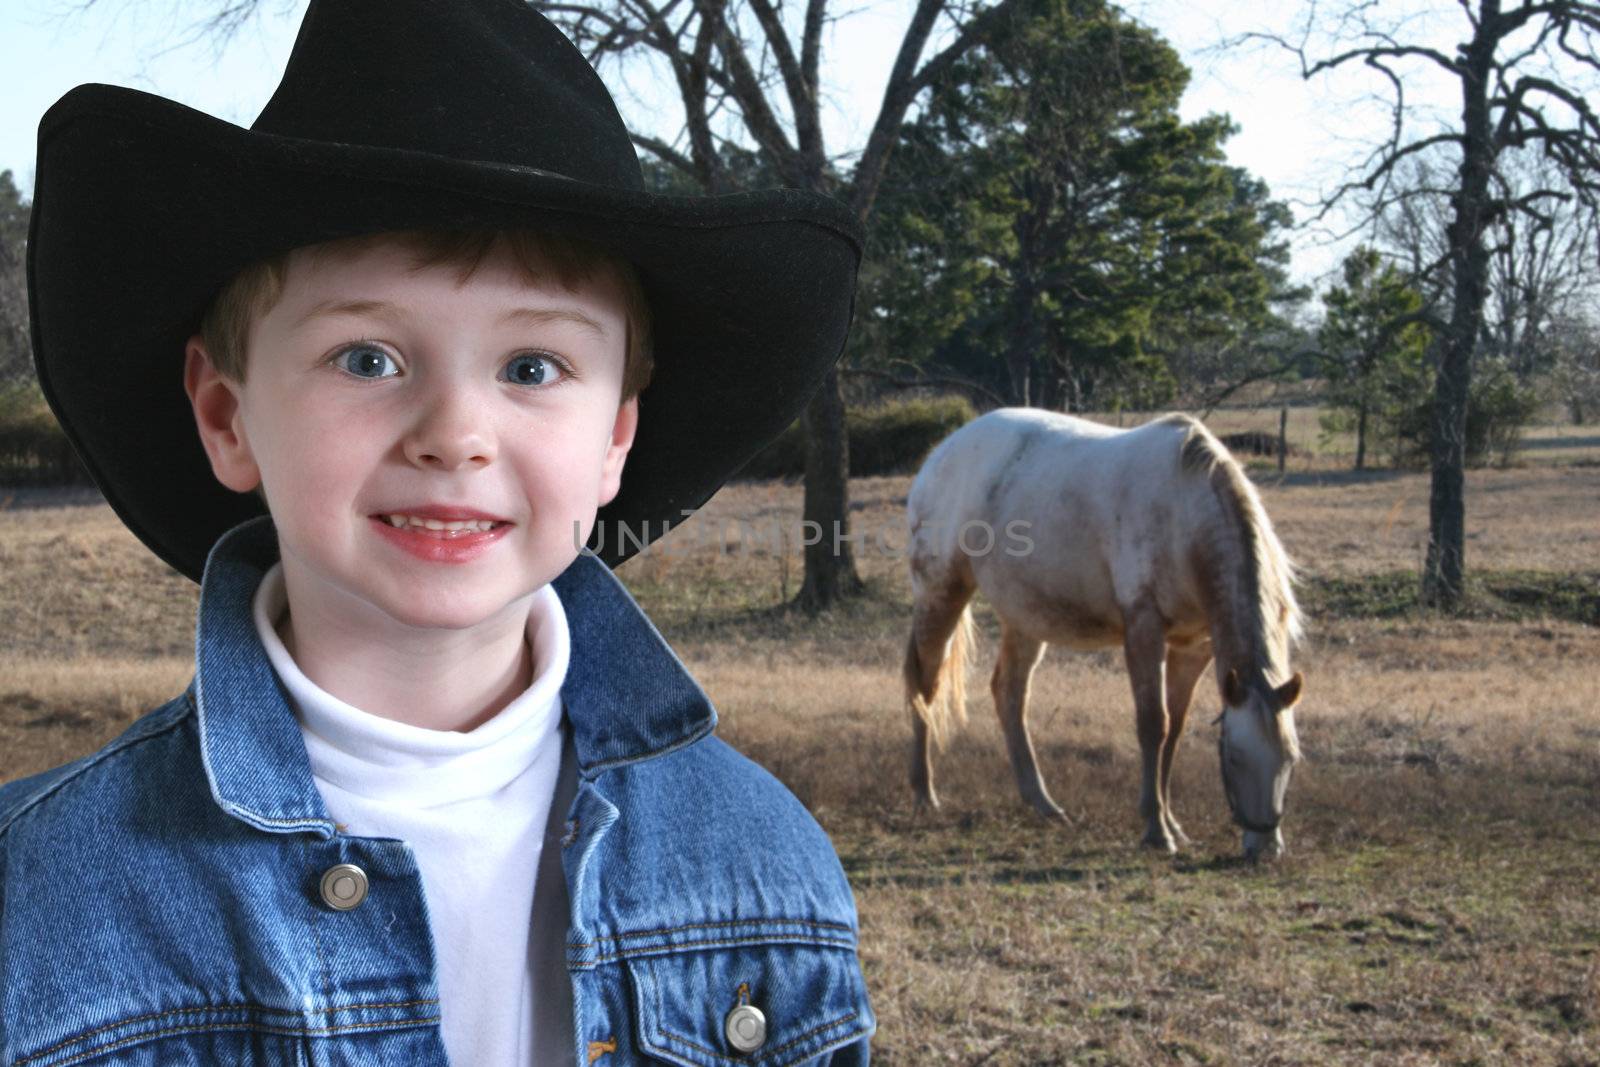 Adorable four year old  in denim jacket and black cowboy hat.  Shot with the Canon 20D.